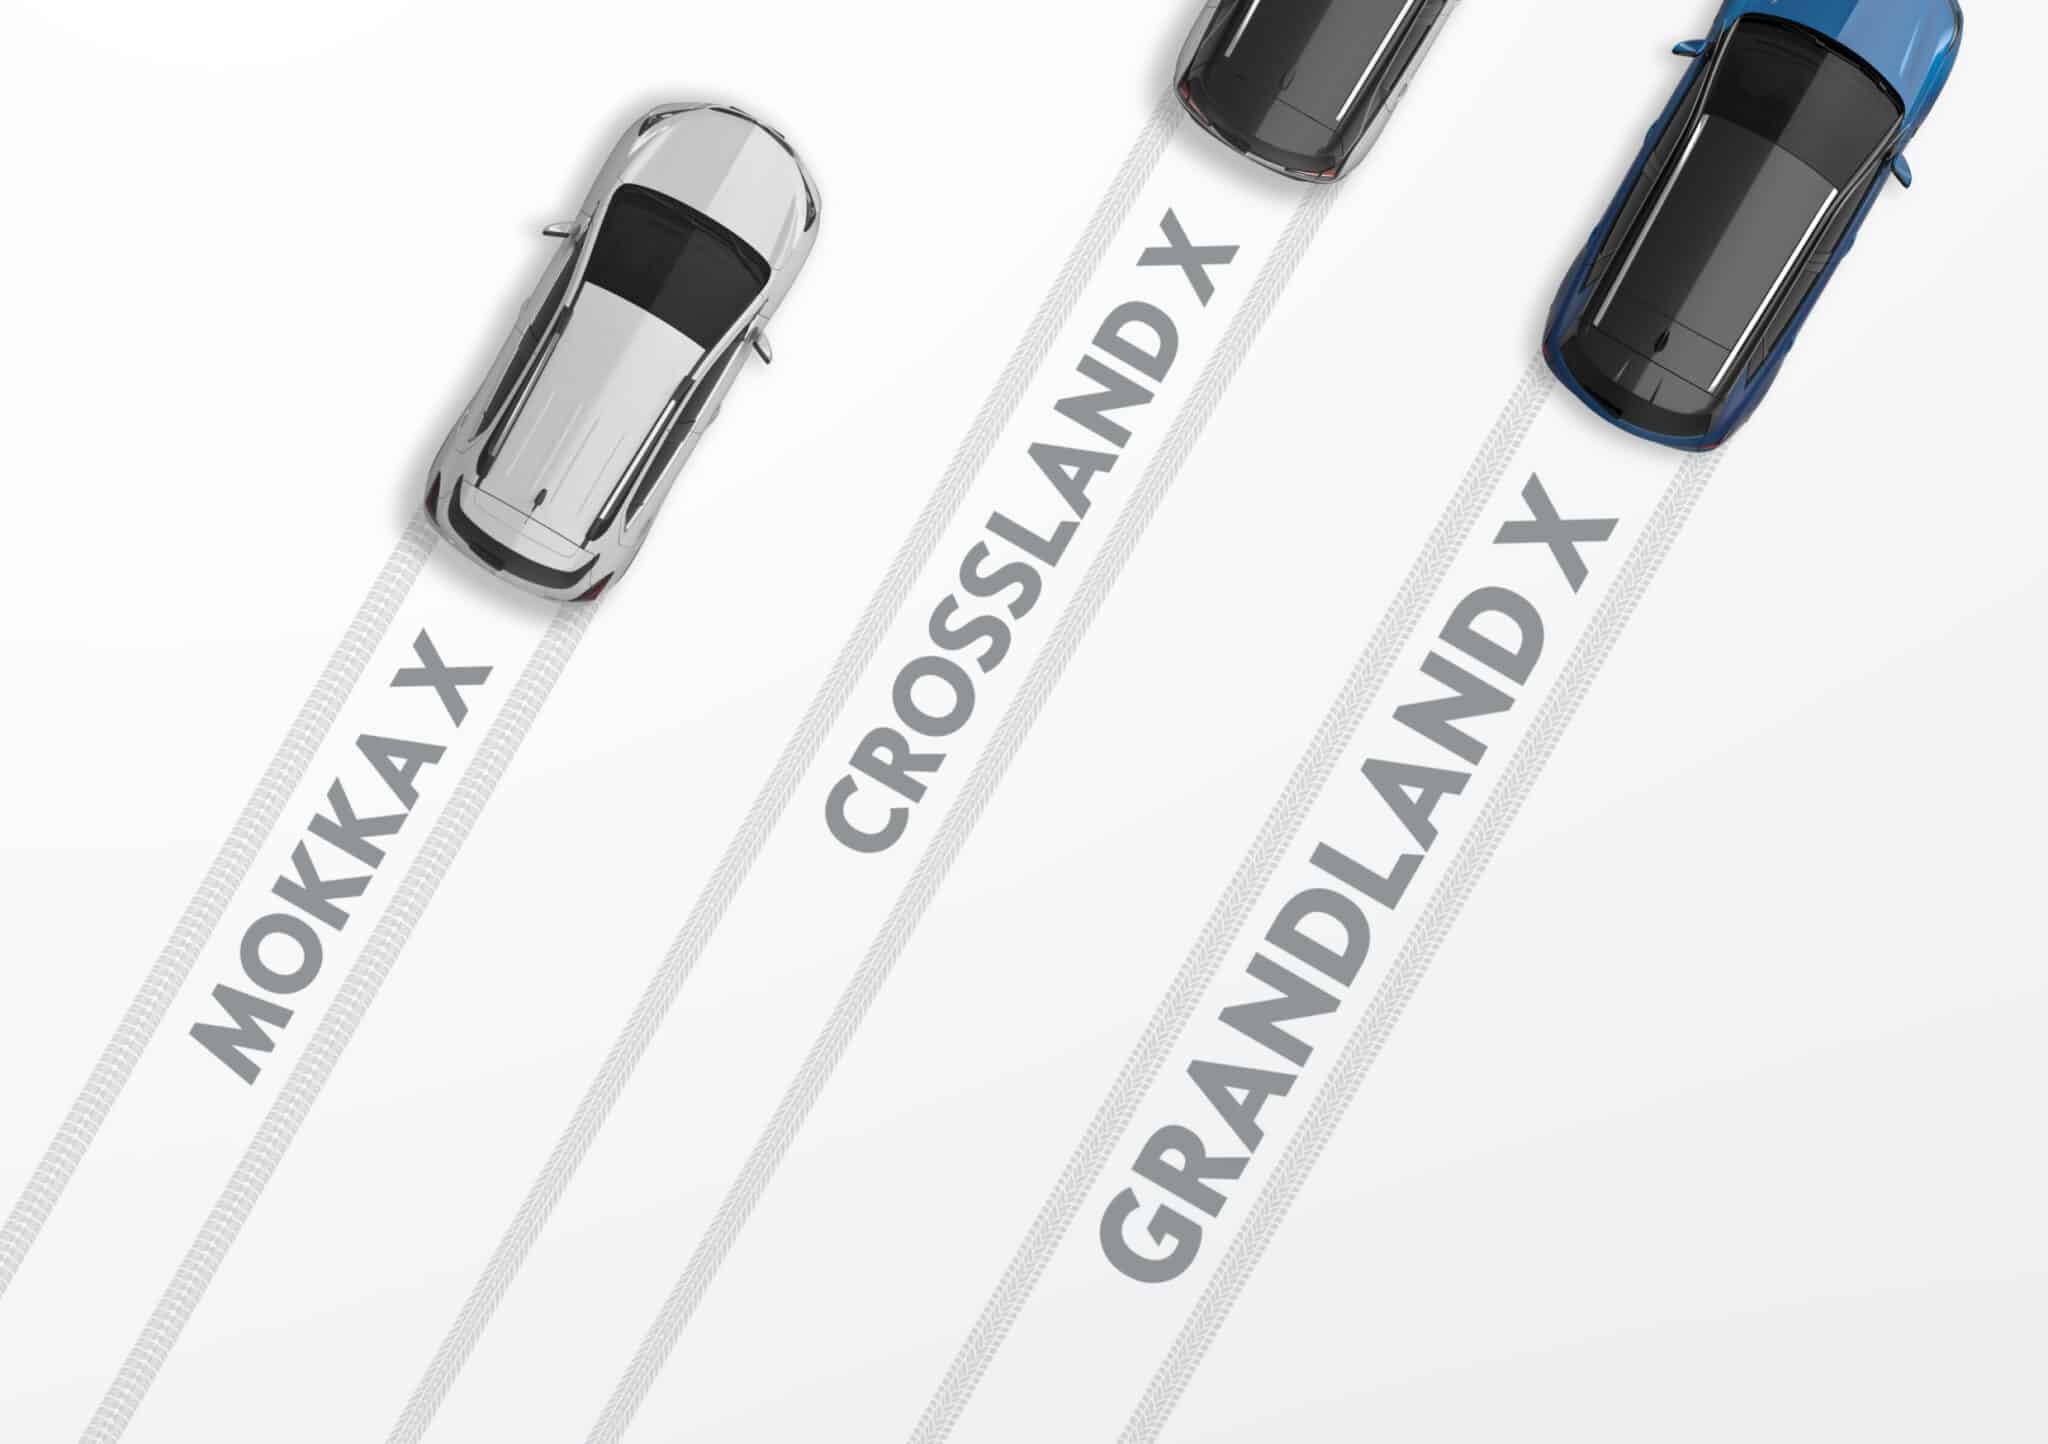 Rugged and elegant meets comfort and practicality: The Grandland X joins MOKKA X and Crossland X in the Opel X family.